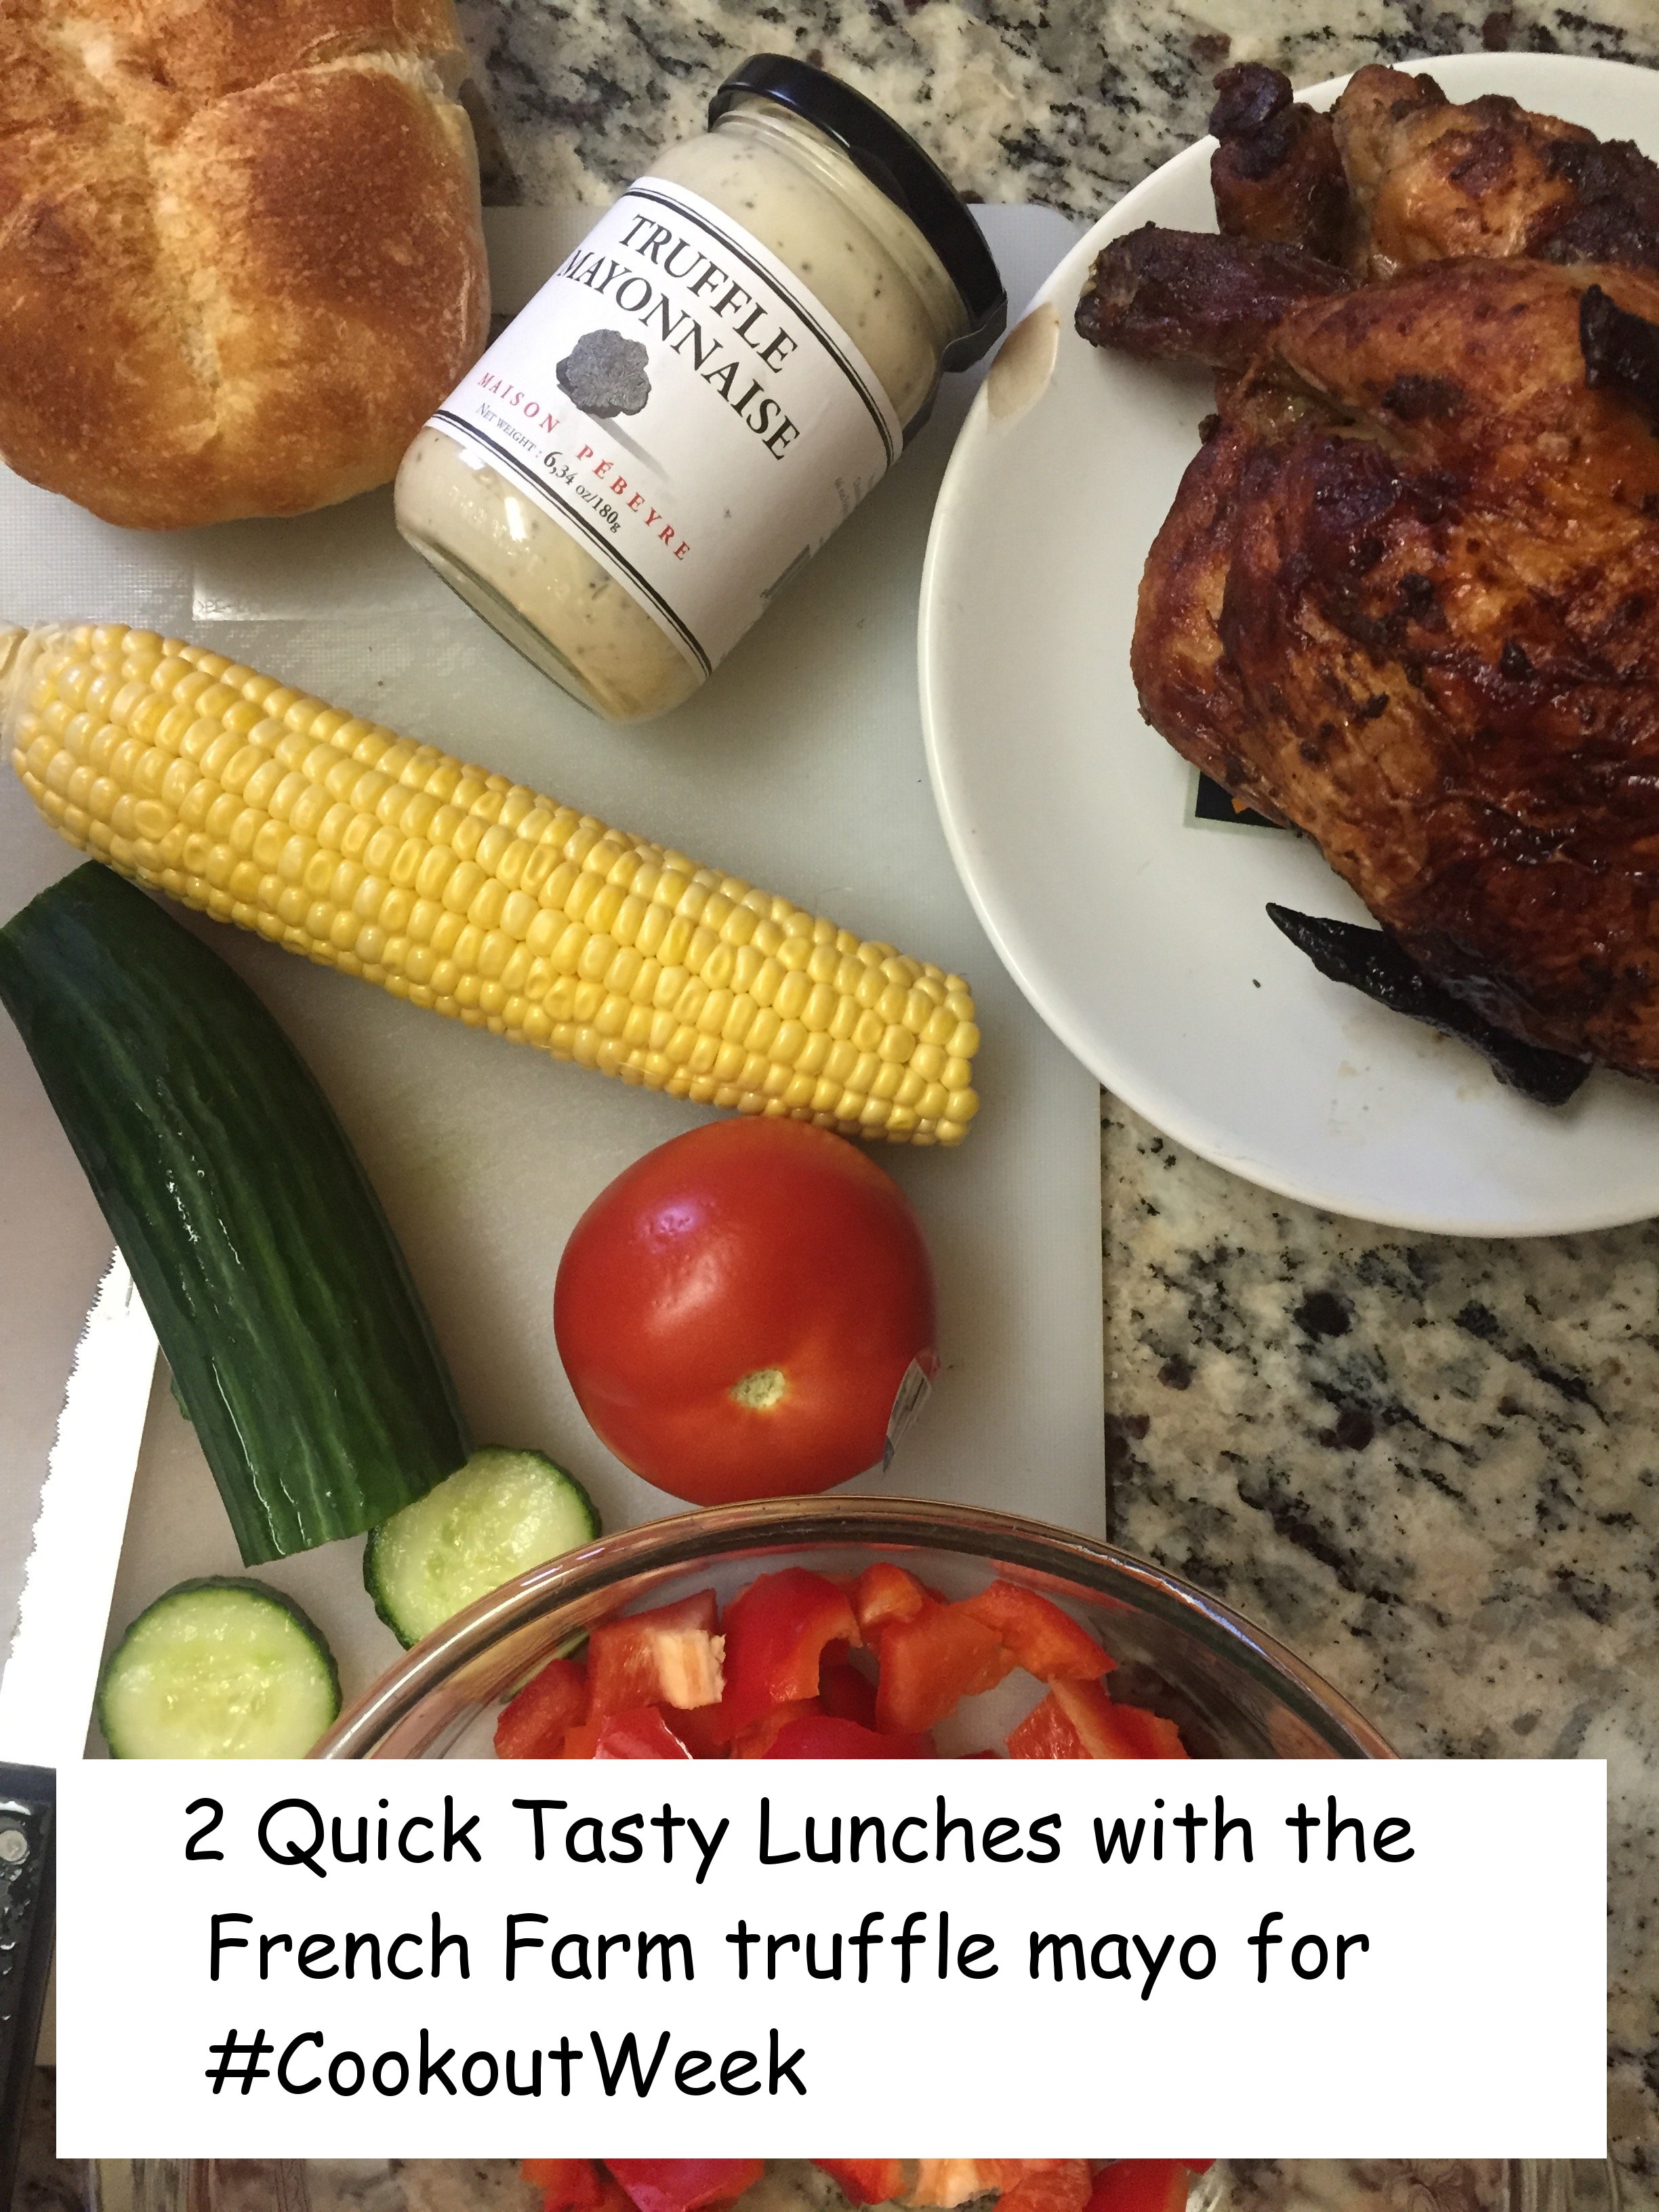 #cookoutweek, giveaway, foodie giveaway, the french farm, tasty sandwich ideas, cookouts, july 4th recipes, bbq recipes, tasty lunch ideas